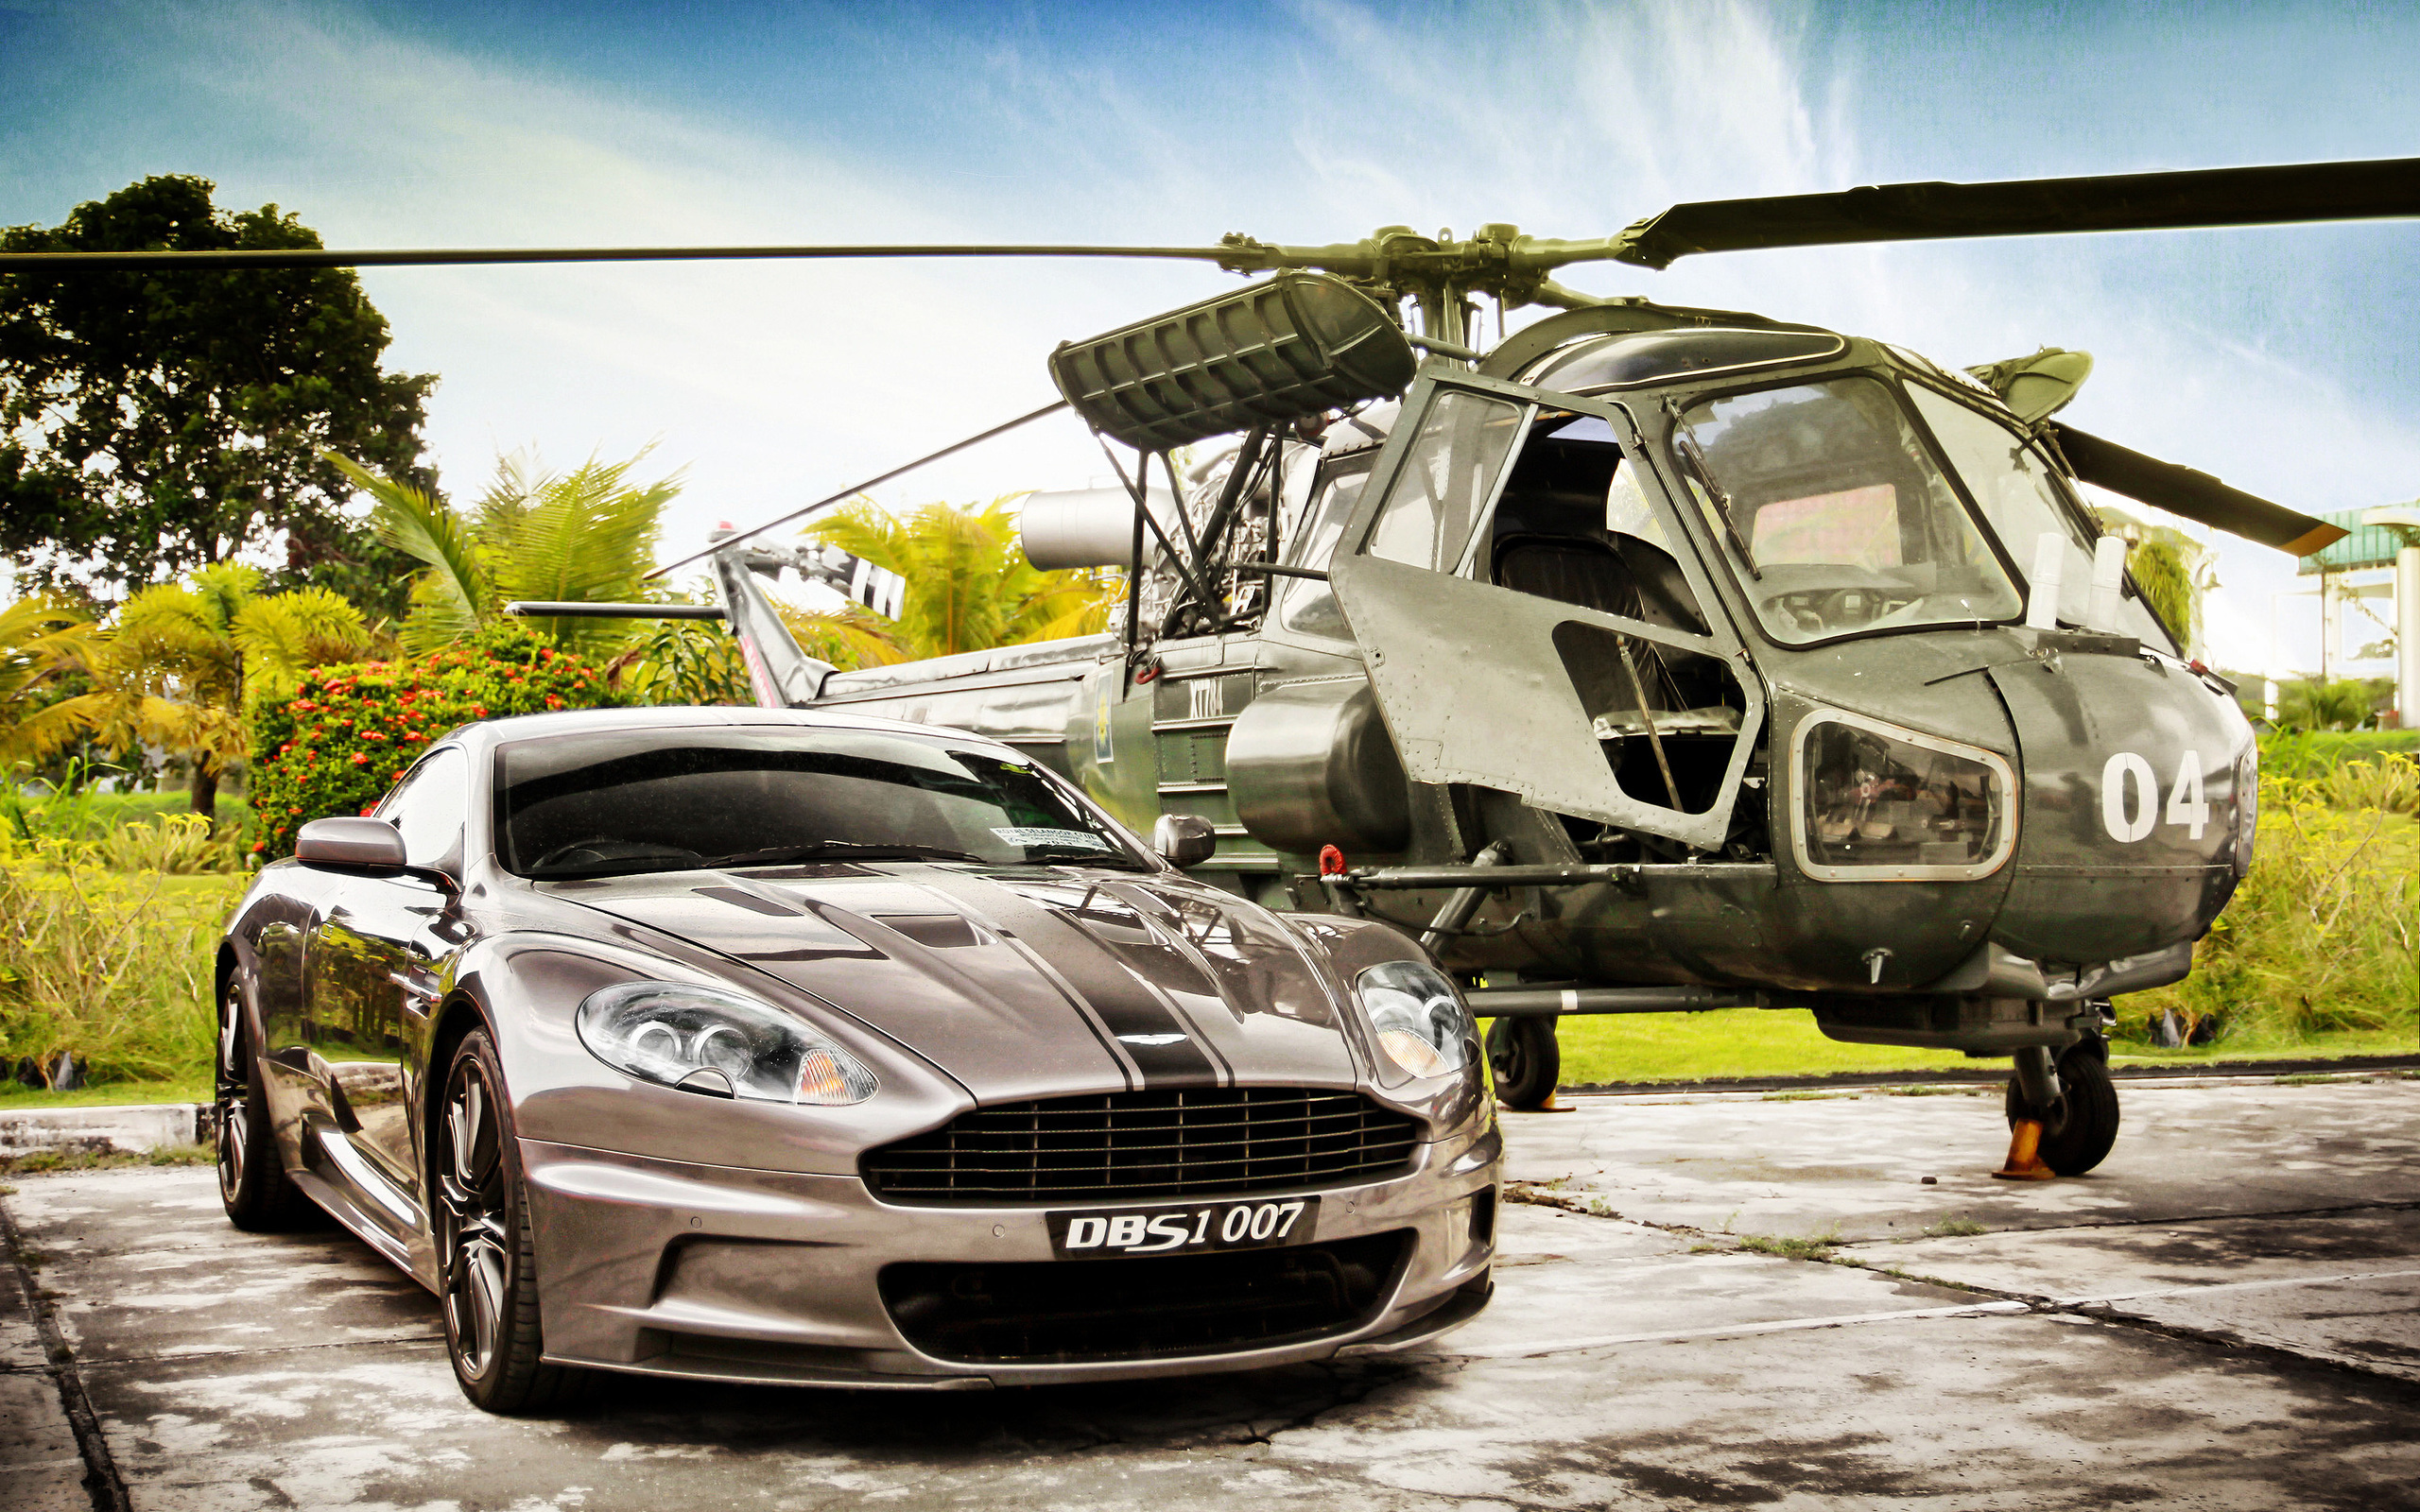 Desktop Backgrounds Helicopters auto, transport